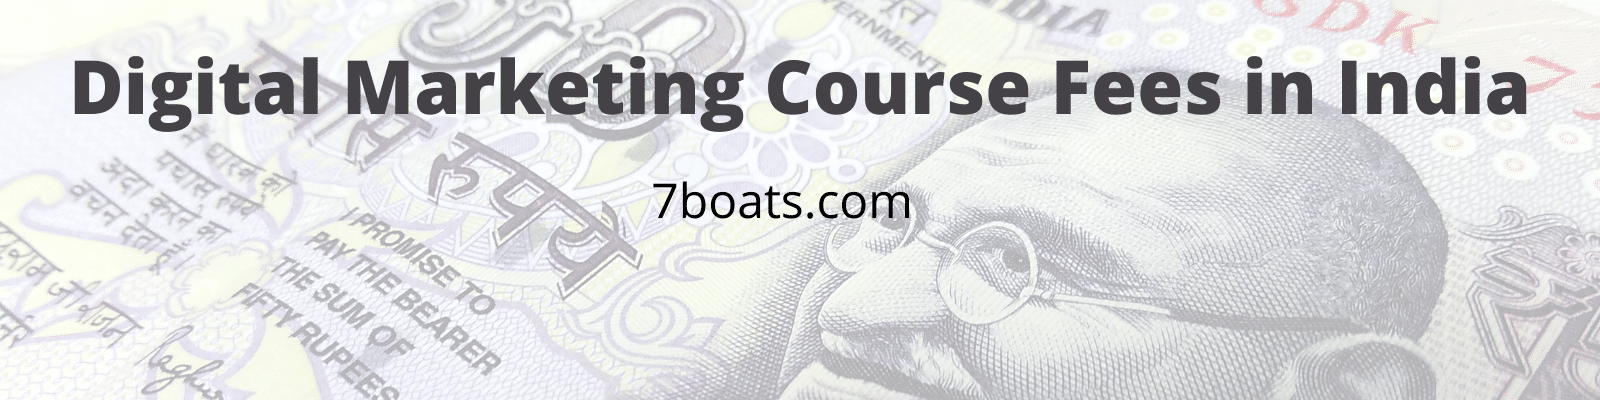 Digital Marketing course fees in India- How much course fee a digital marketing institute should charge in India?